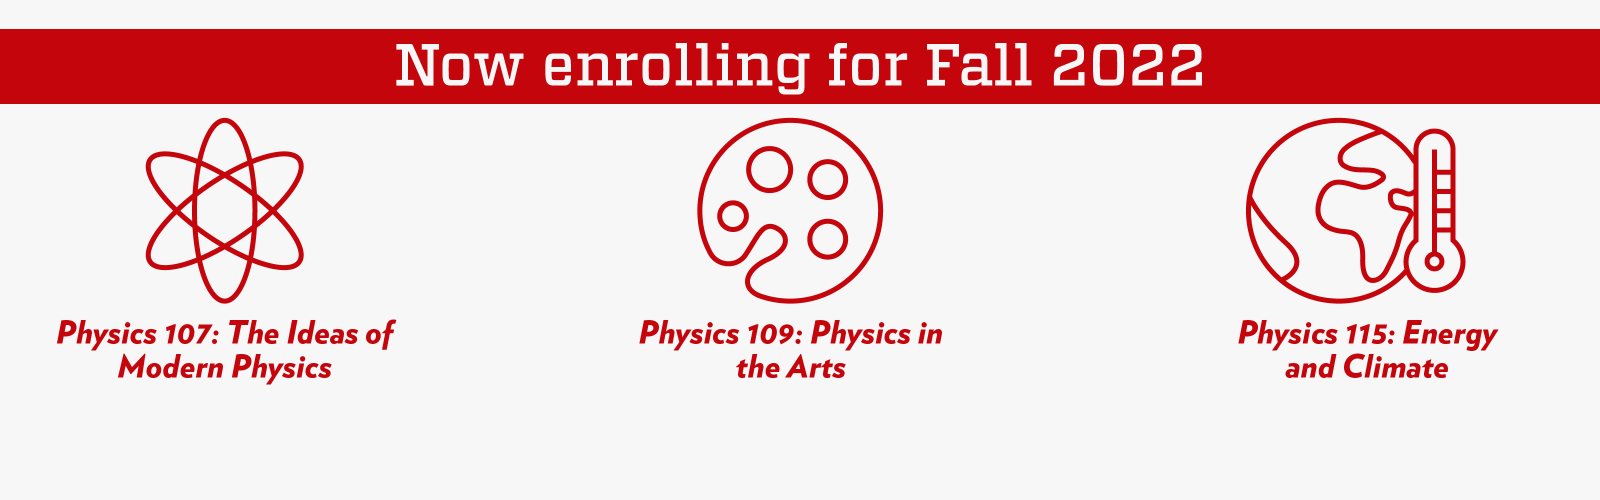 says "now enrolling fall 2022" [atom icon] Physics 107 the Ideas of Modern Physics | [art palette icon] Physics 109: Physics in the Arts | [globe with thermometer icon] Physics 115: Energy and Climate